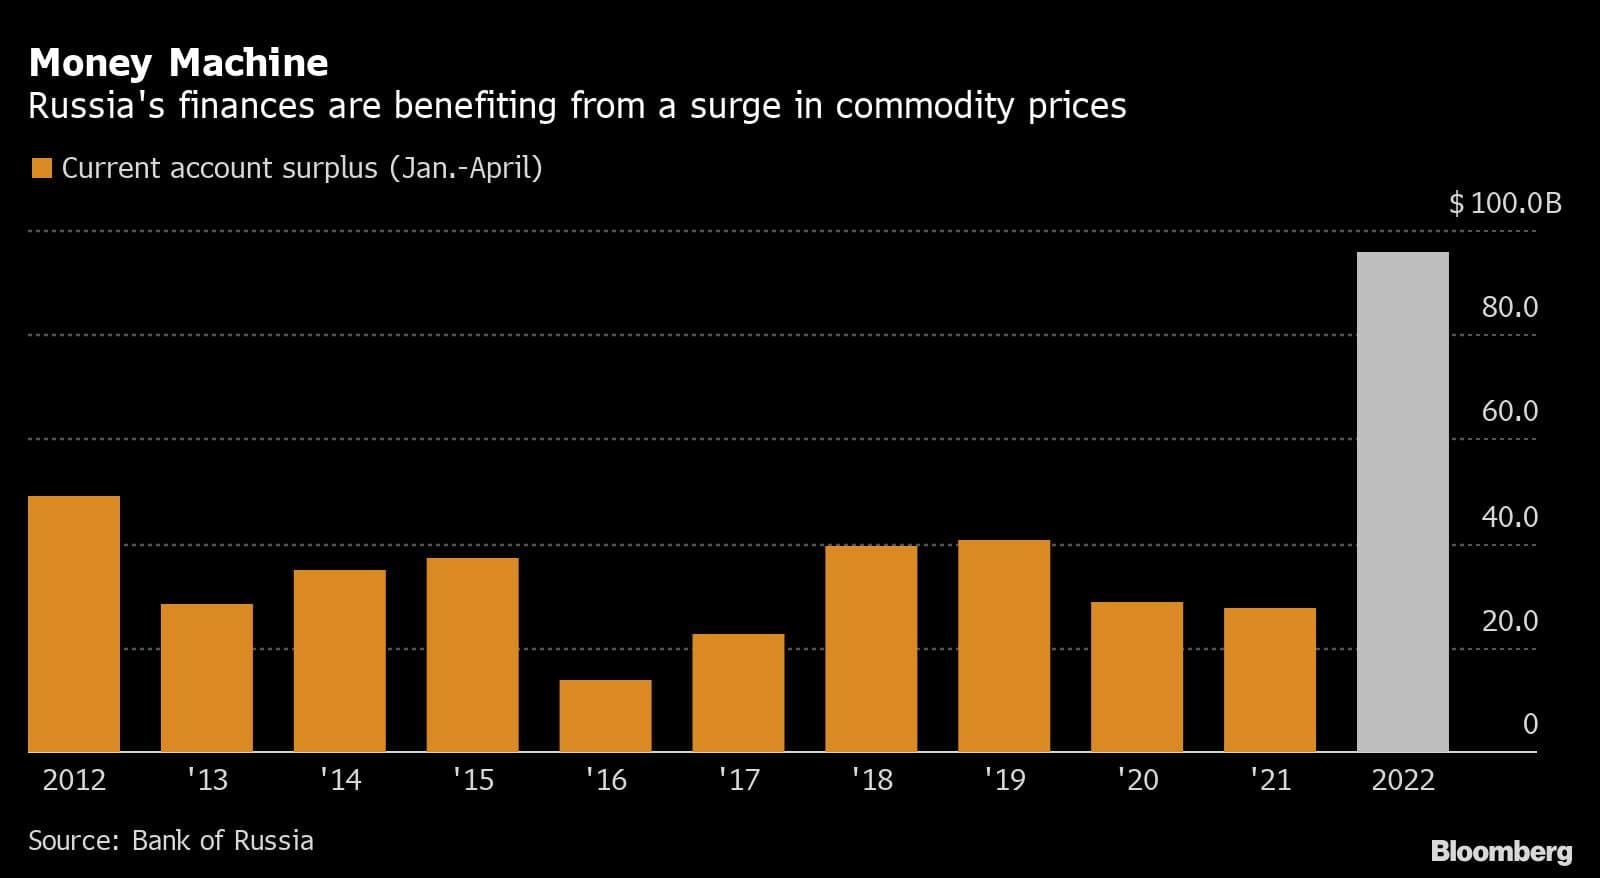 Money Machine | Russia's finances are benefiting from a surge in commodity prices